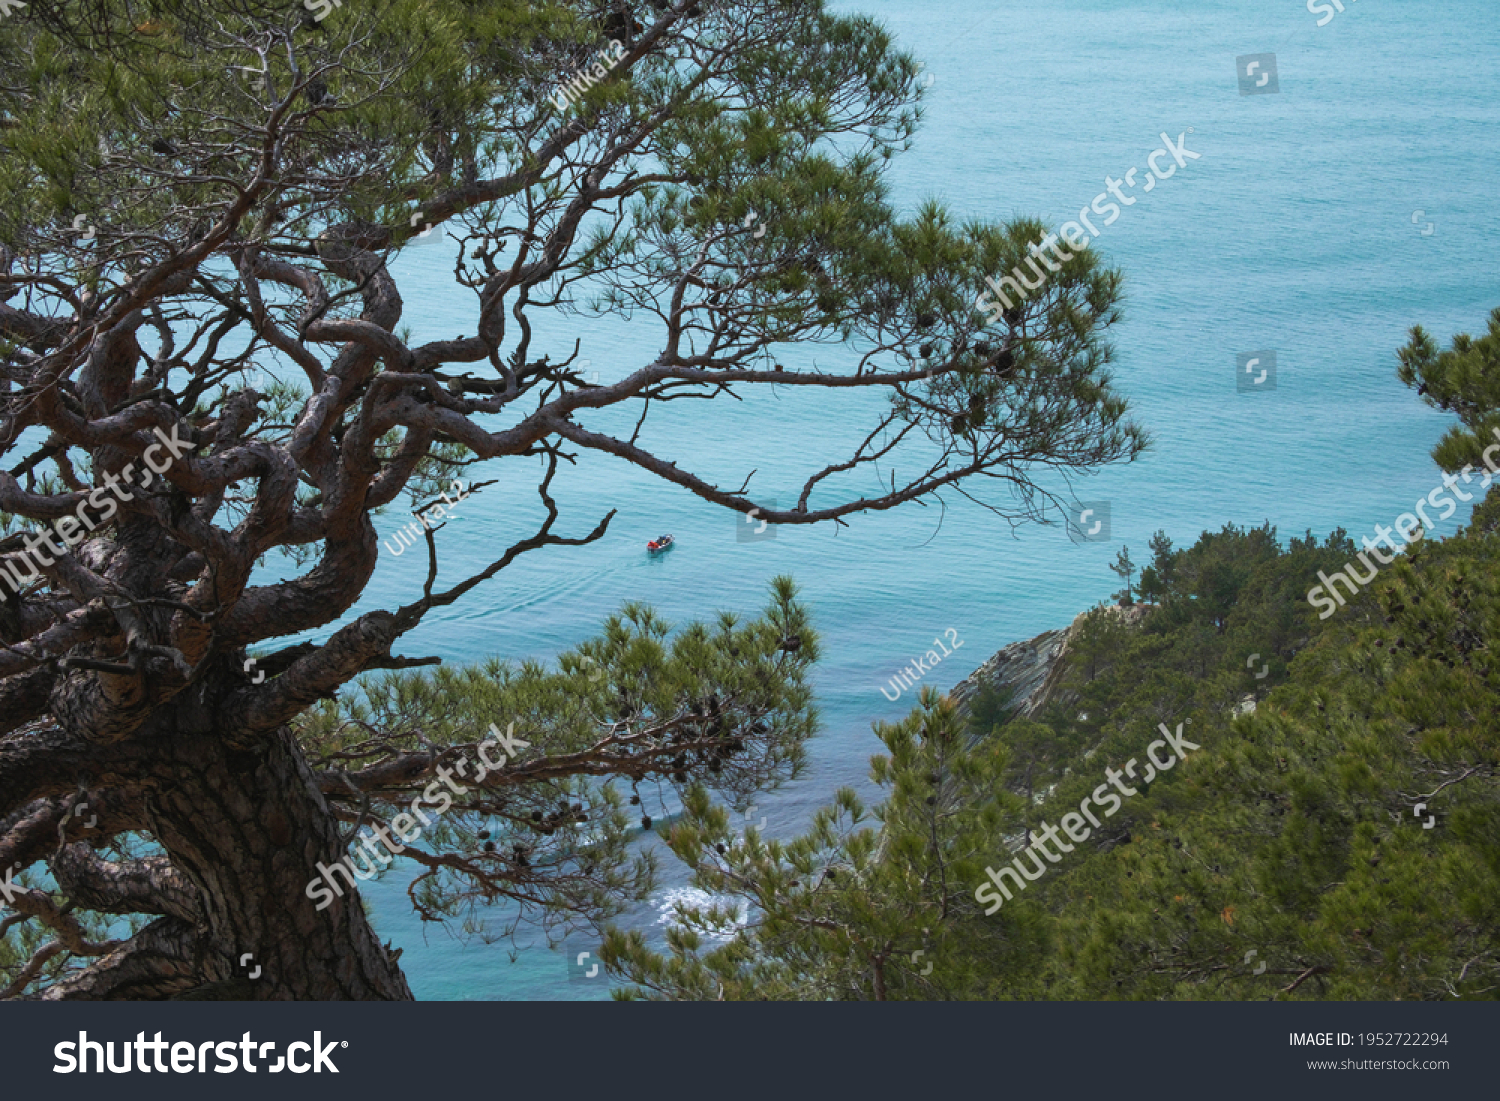 Relic Pitsunda pine growing on the rocky shores of the Black Sea #1952722294